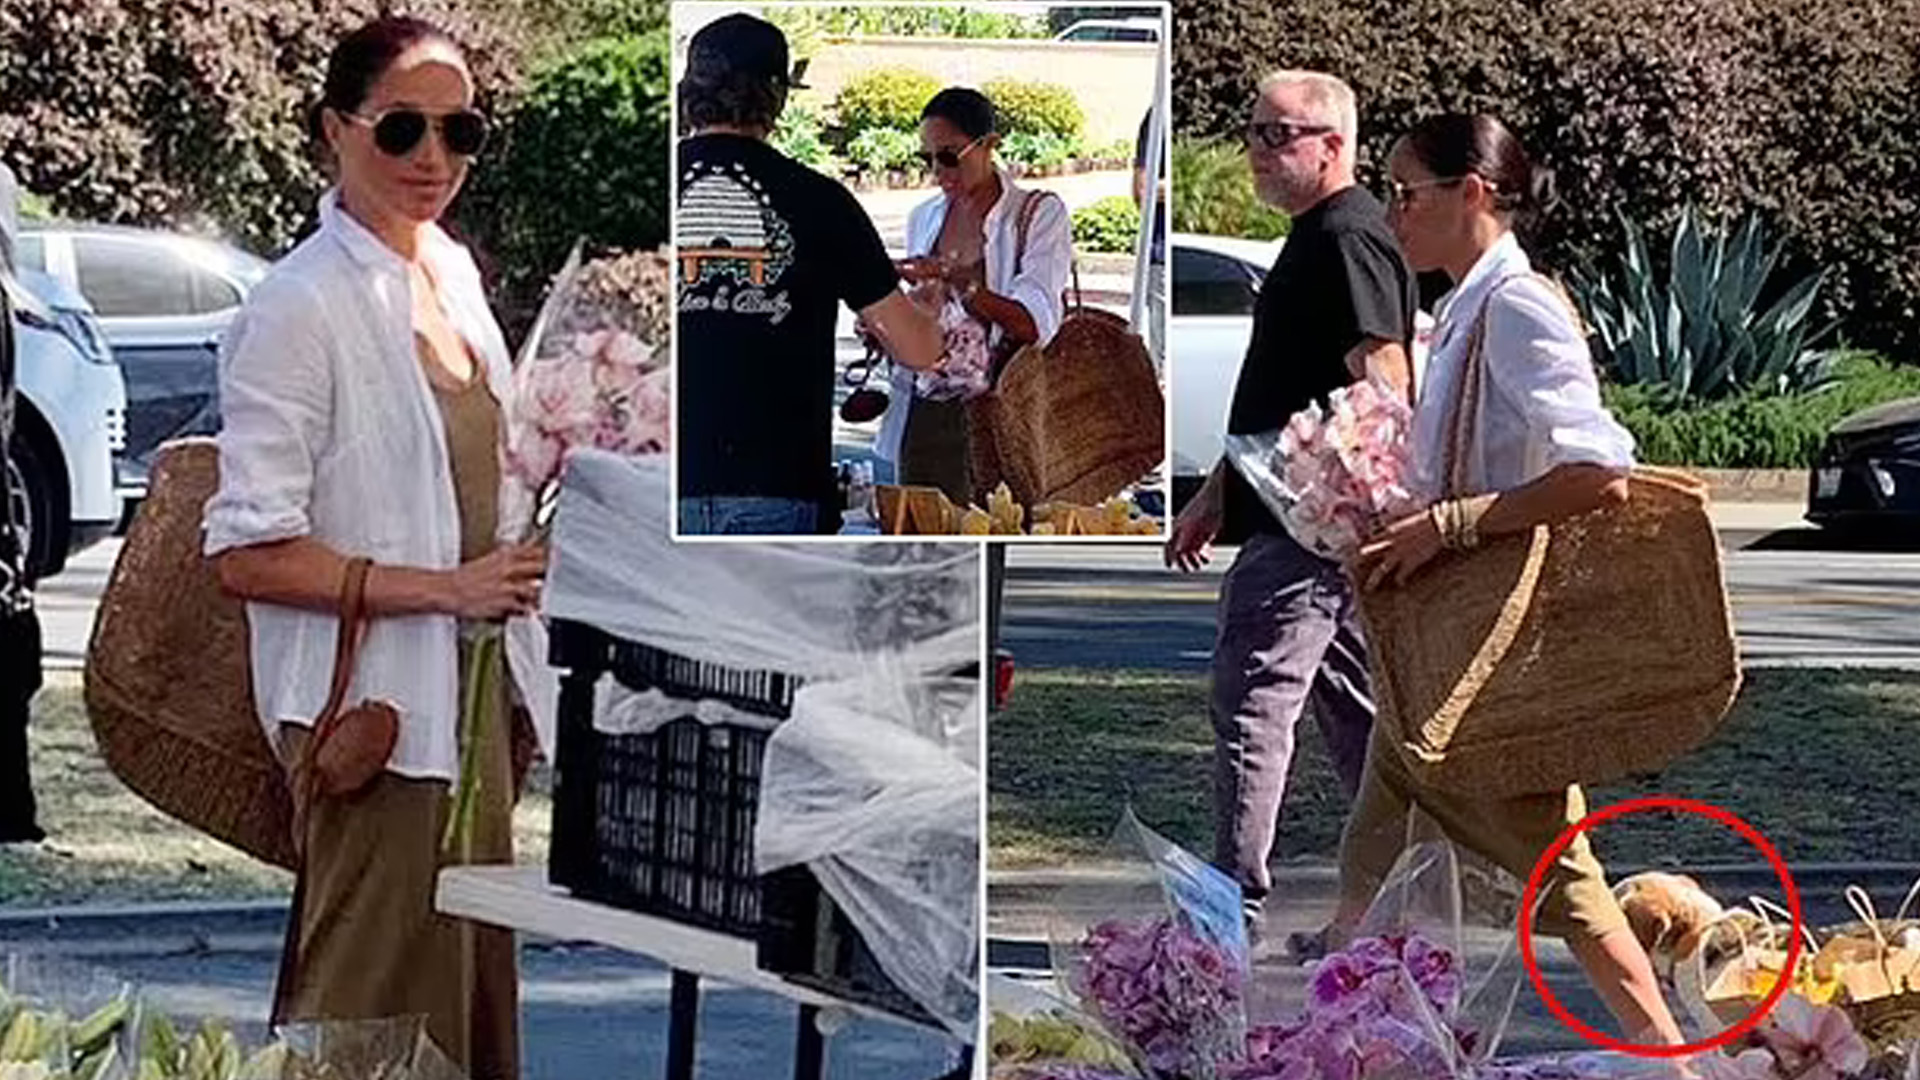 Meghan Markle Spotted Shopping from the Farmer’s Market!